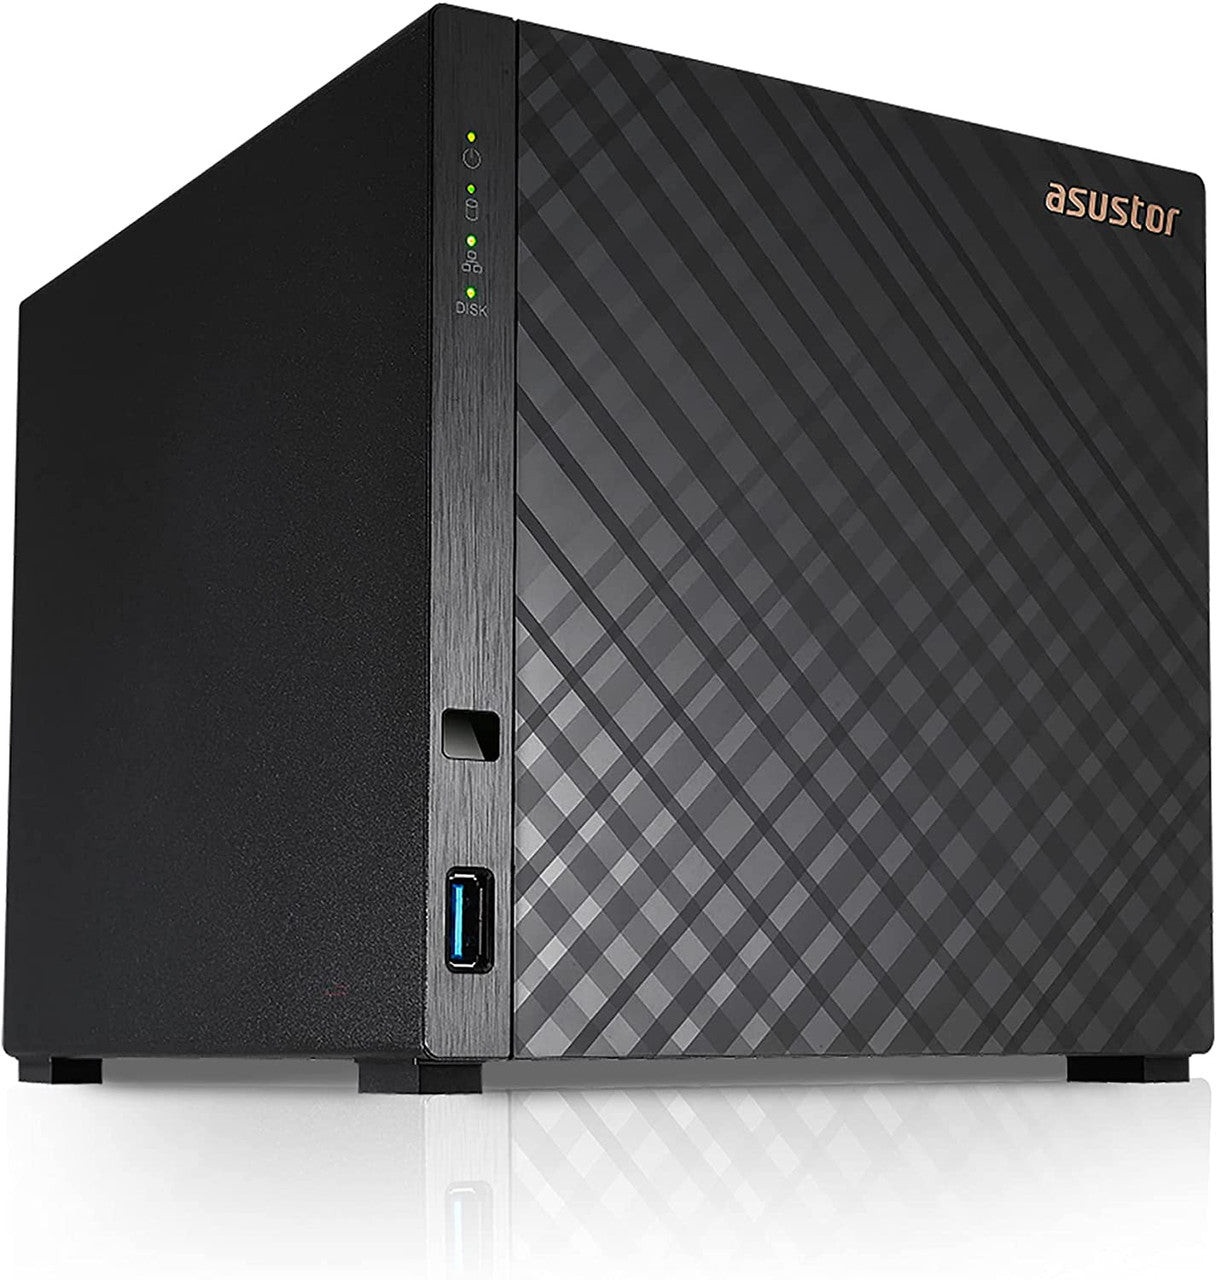 Asustor AS1104T 4-Bay Drivestor 4 NAS with 1GB RAM and 24TB (4x6TB) Seagate Ironwolf PRO Drives